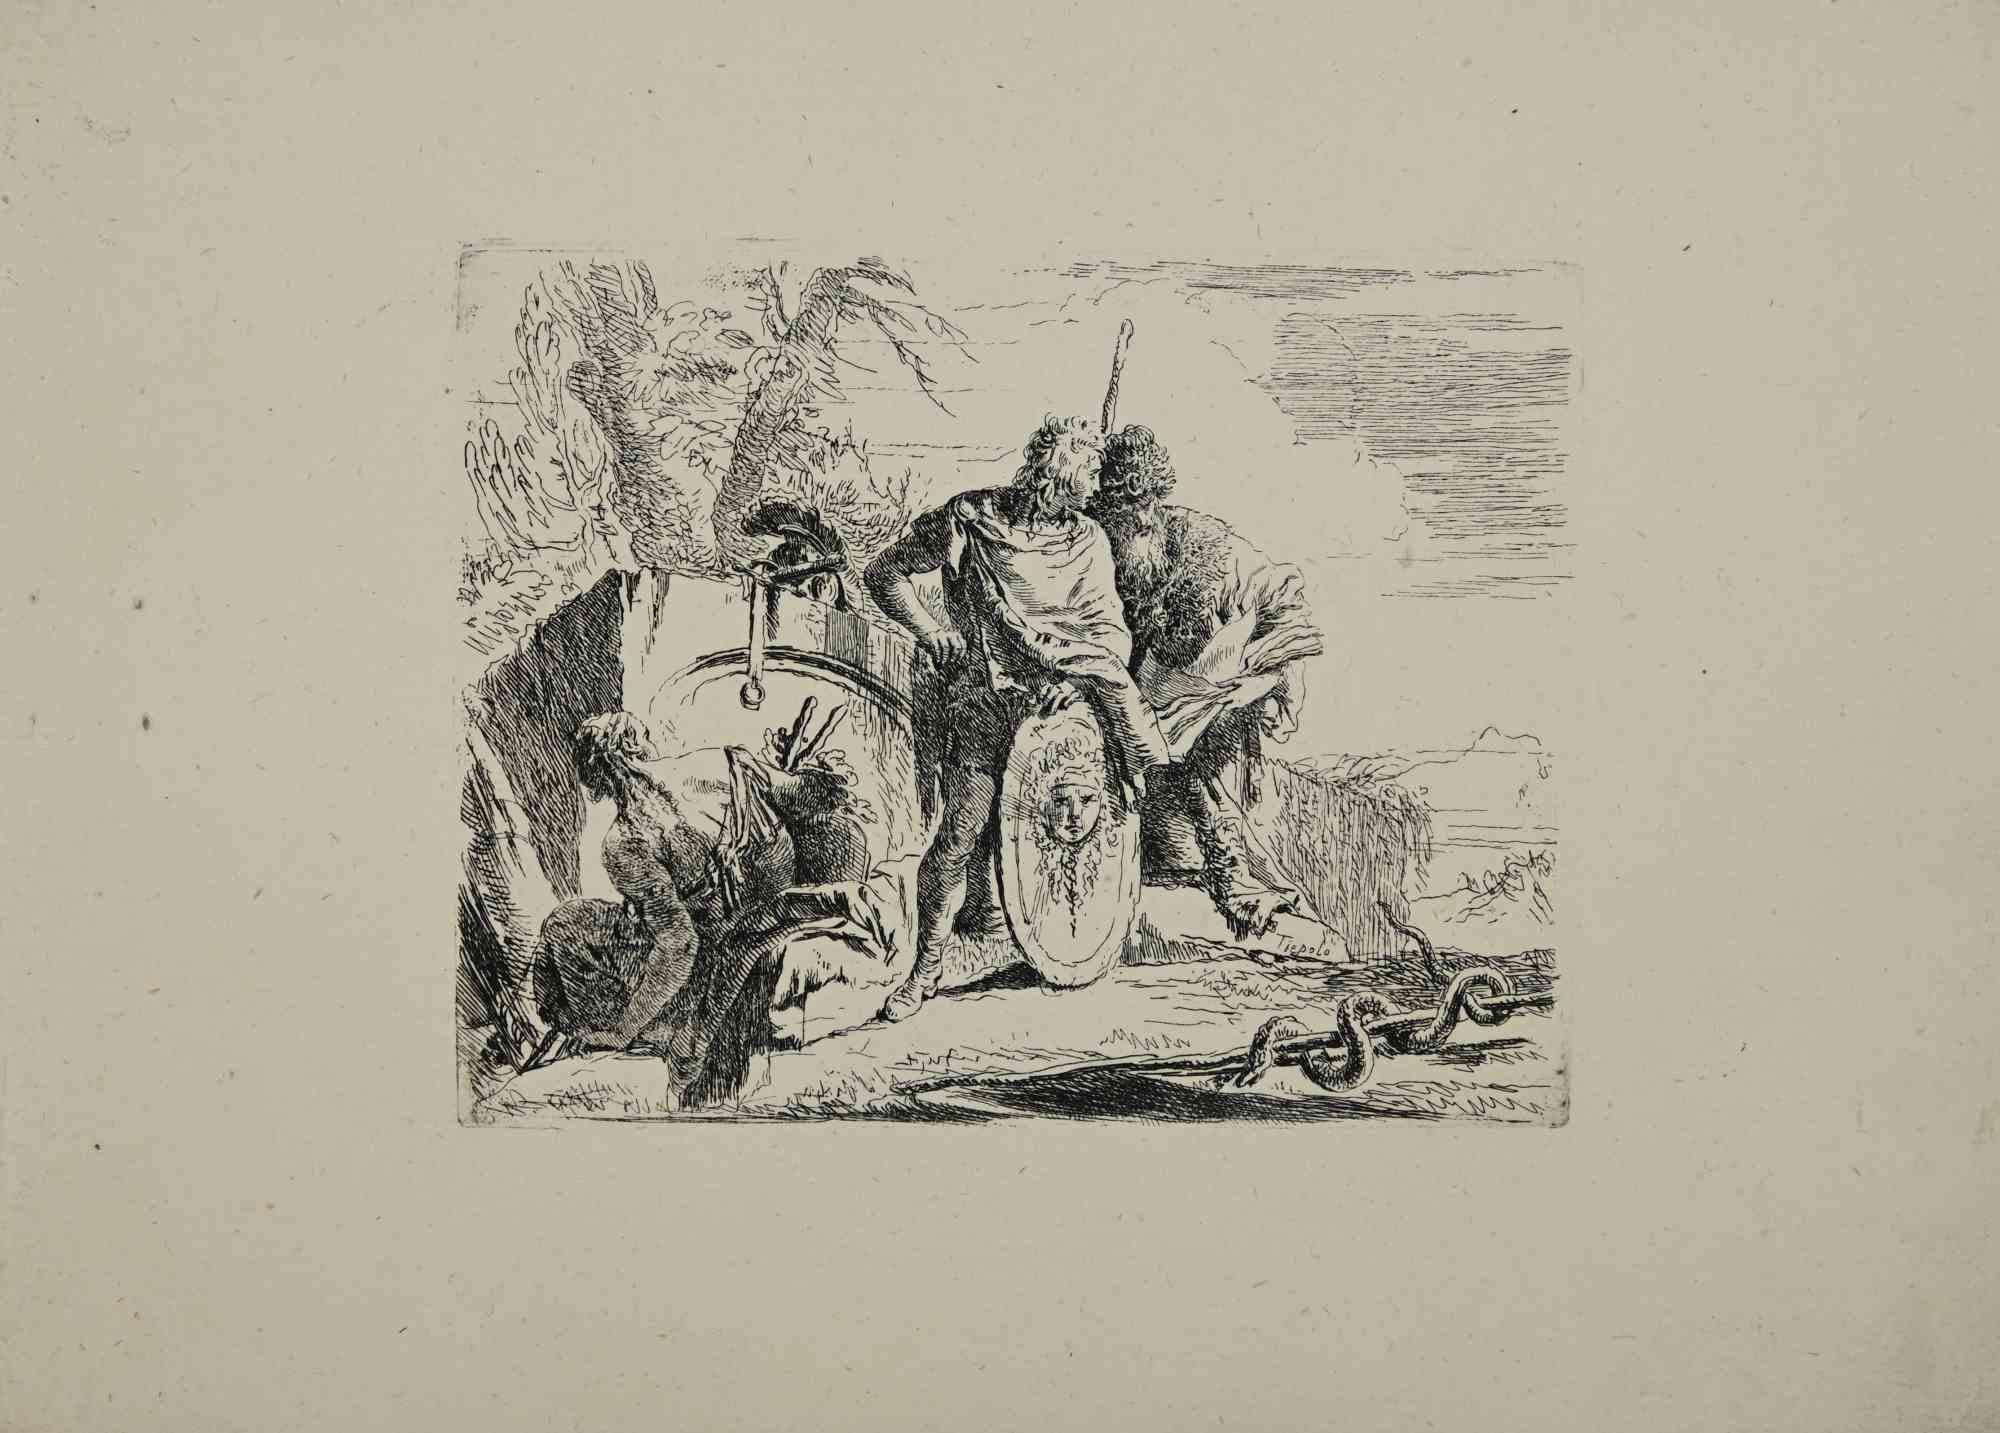 Giovanni Battista Tiepolo Figurative Print - Two Soldiers - Etching by G.B. Tiepolo - 1795